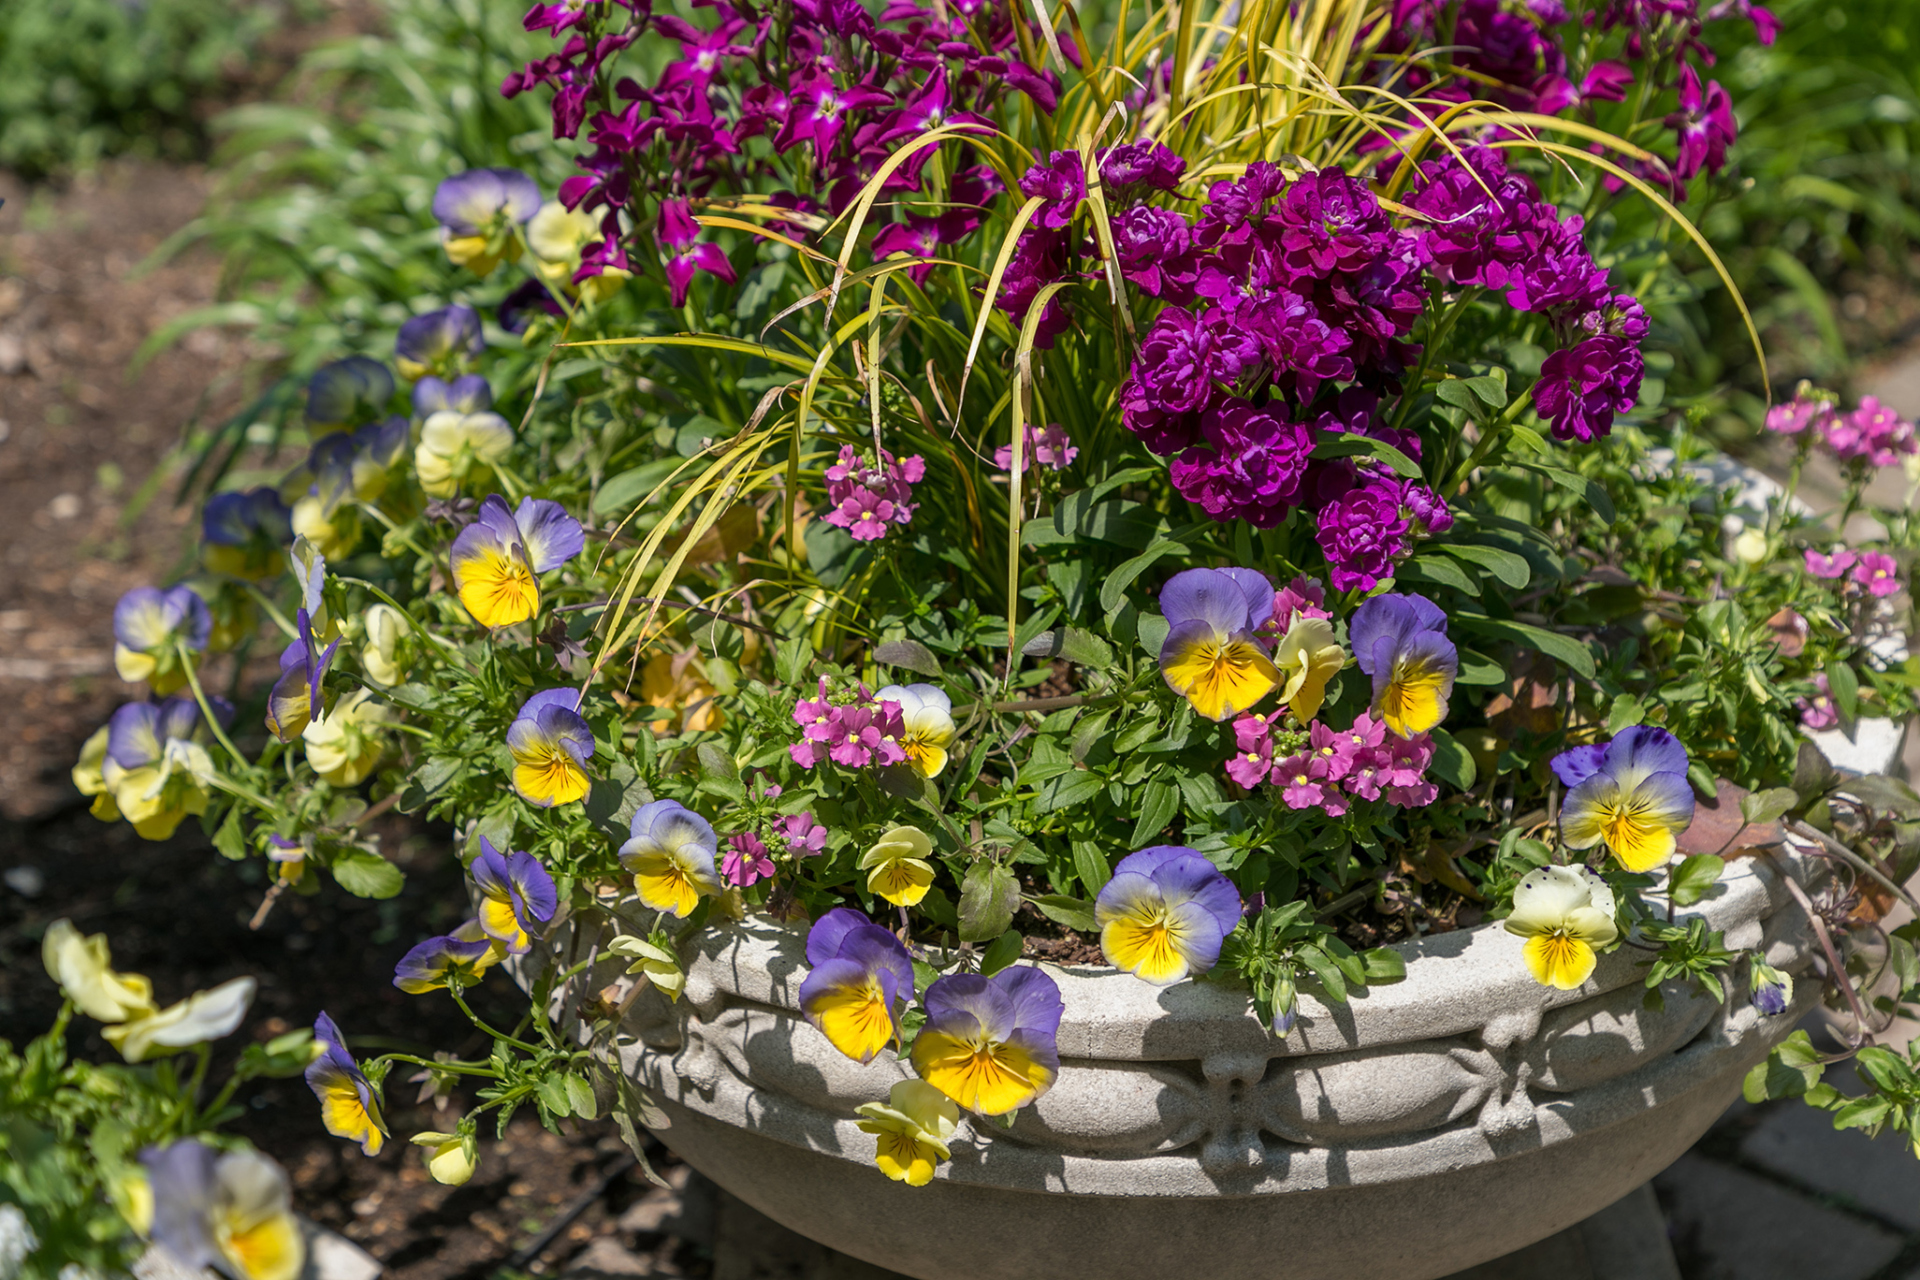 A container garden overflowing with colorful flowers and foliage